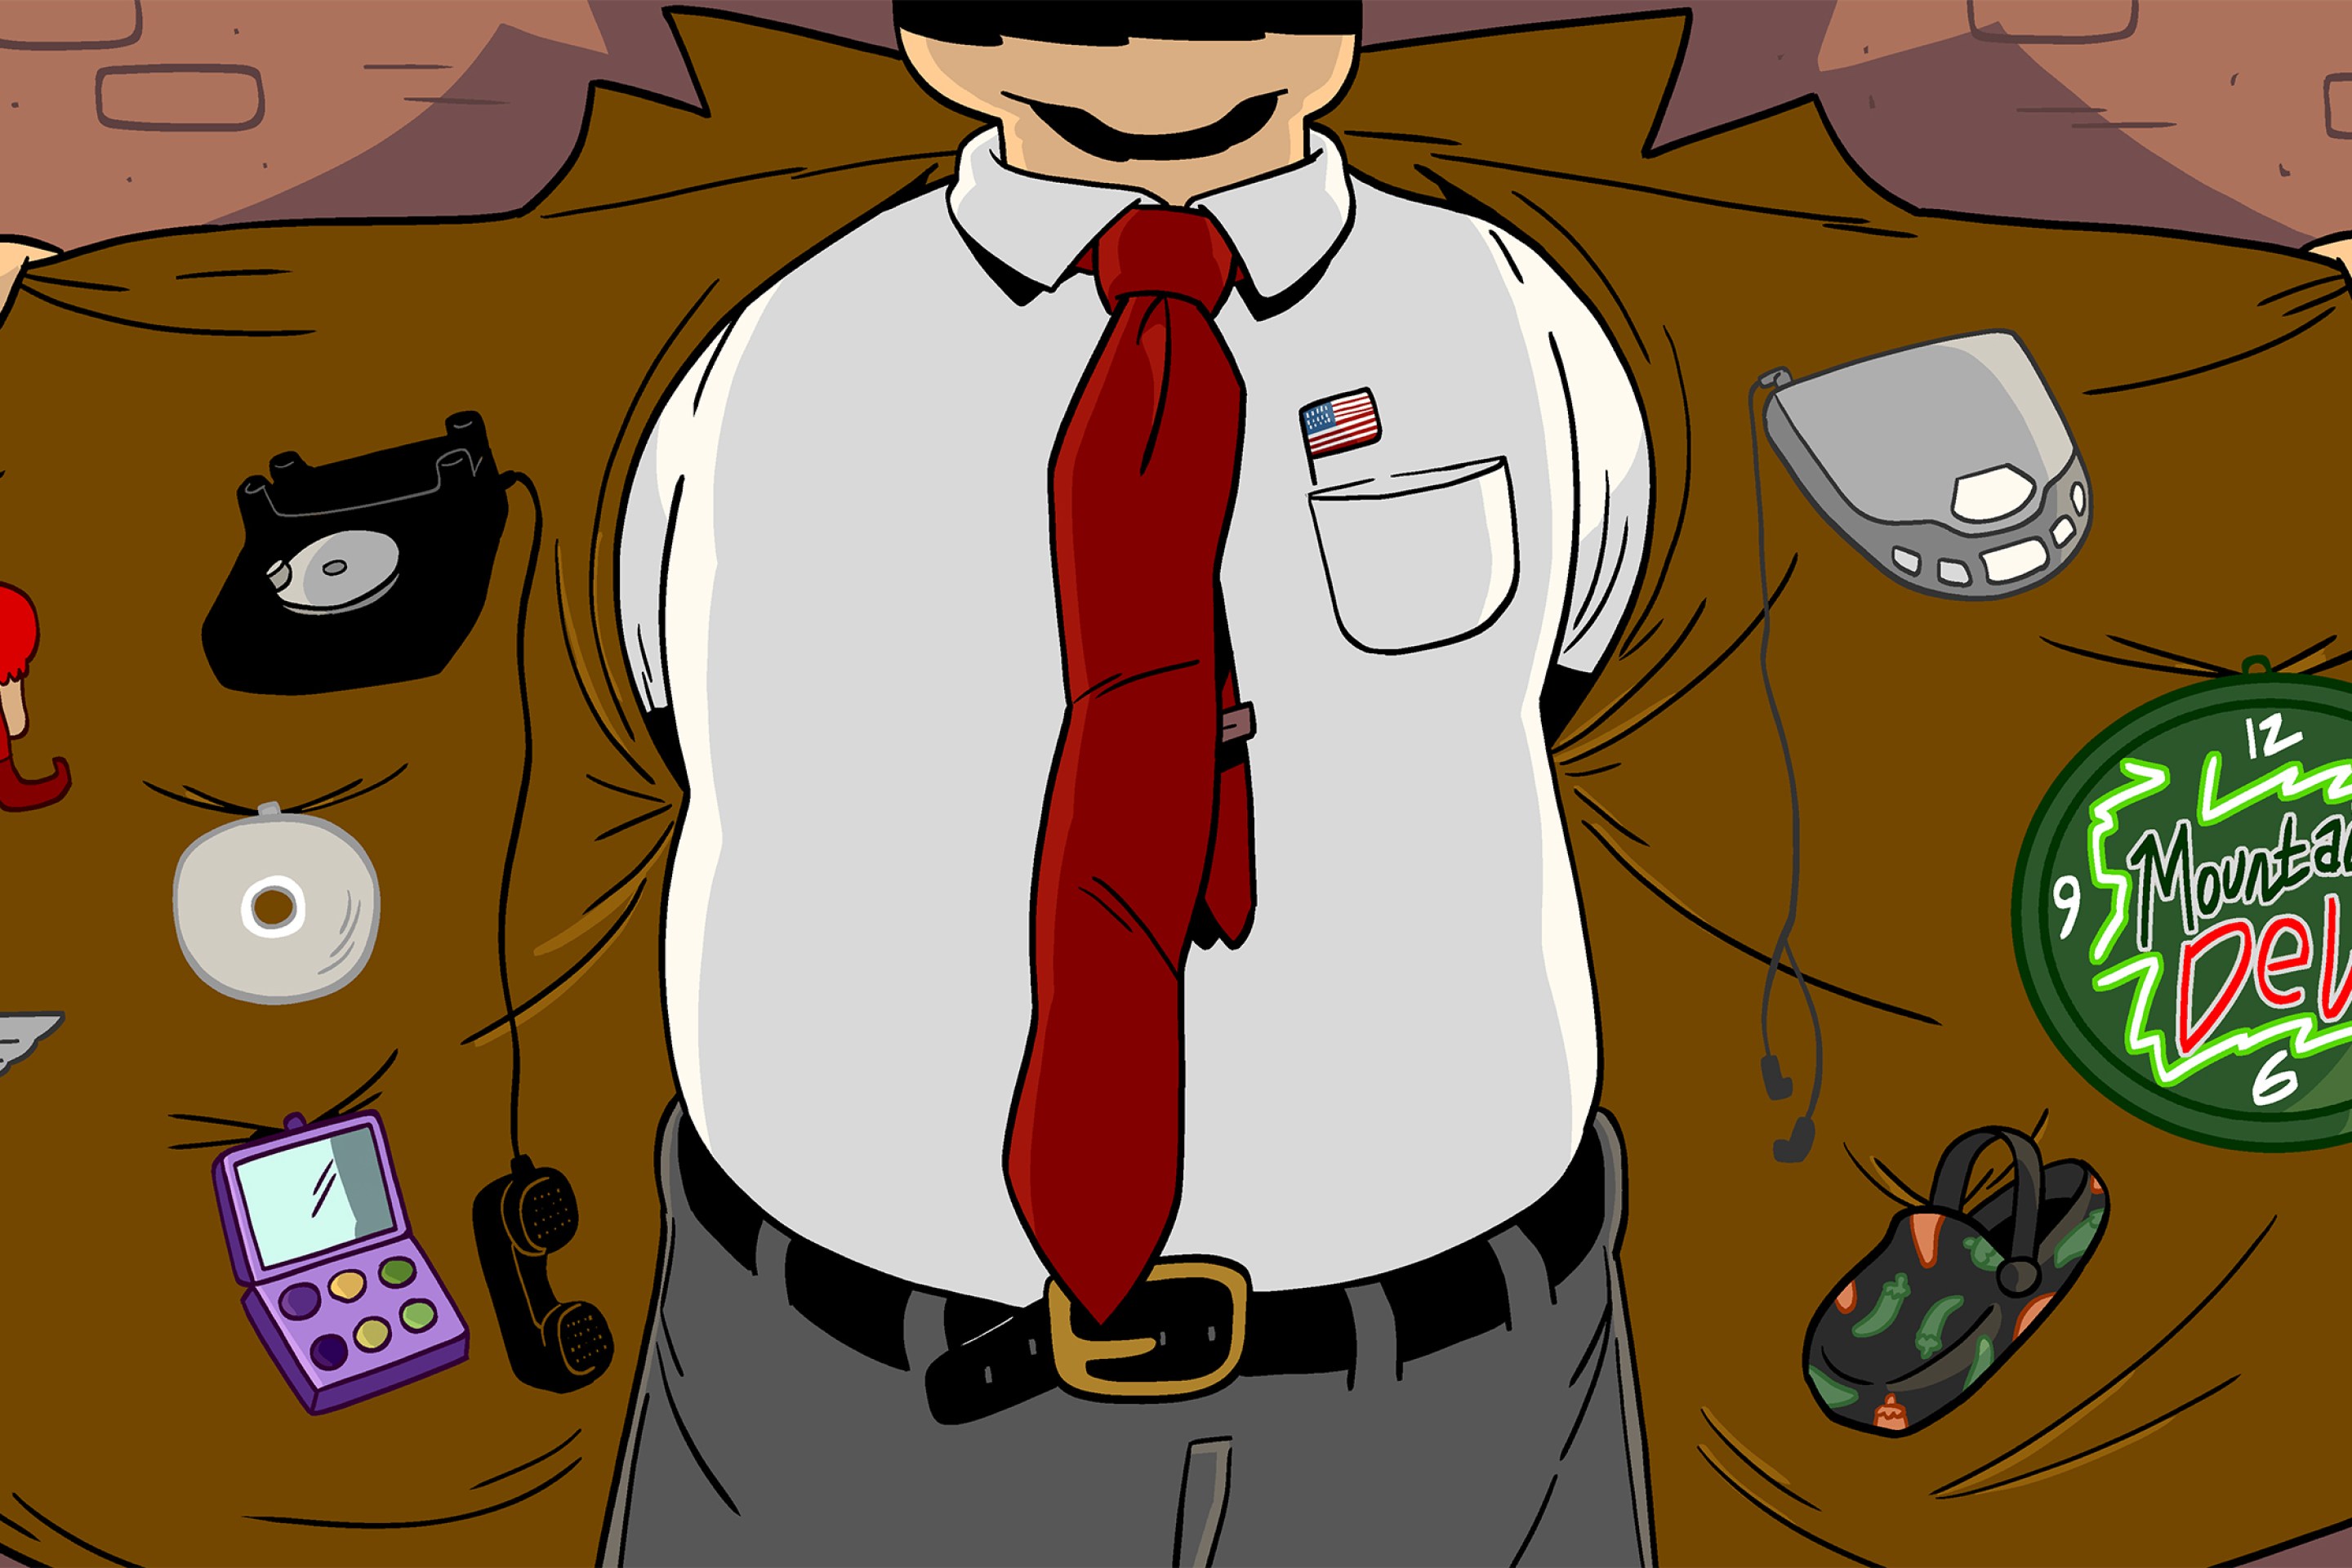 An illustration of a guy opening his coat to display items for sale